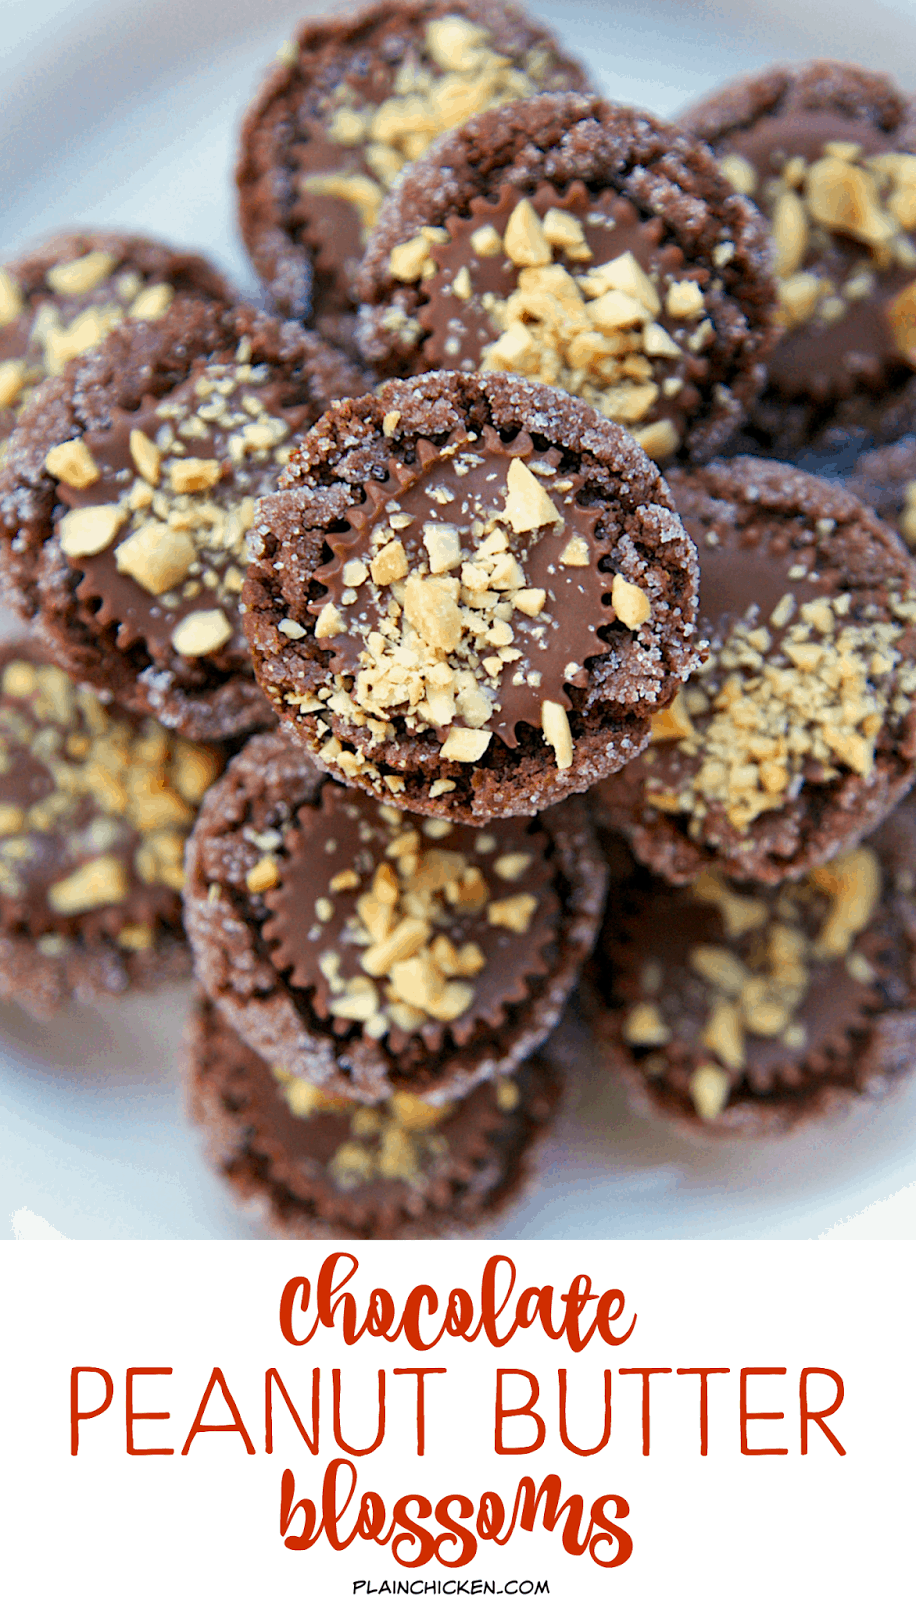 Chocolate Peanut Butter Blossoms - peanut butter chocolate cookies topped with a Reese's cup and chopped peanuts. OMG! Heaven! I have zero self-control around these cookies! Makes 5 dozen - great for sharing.